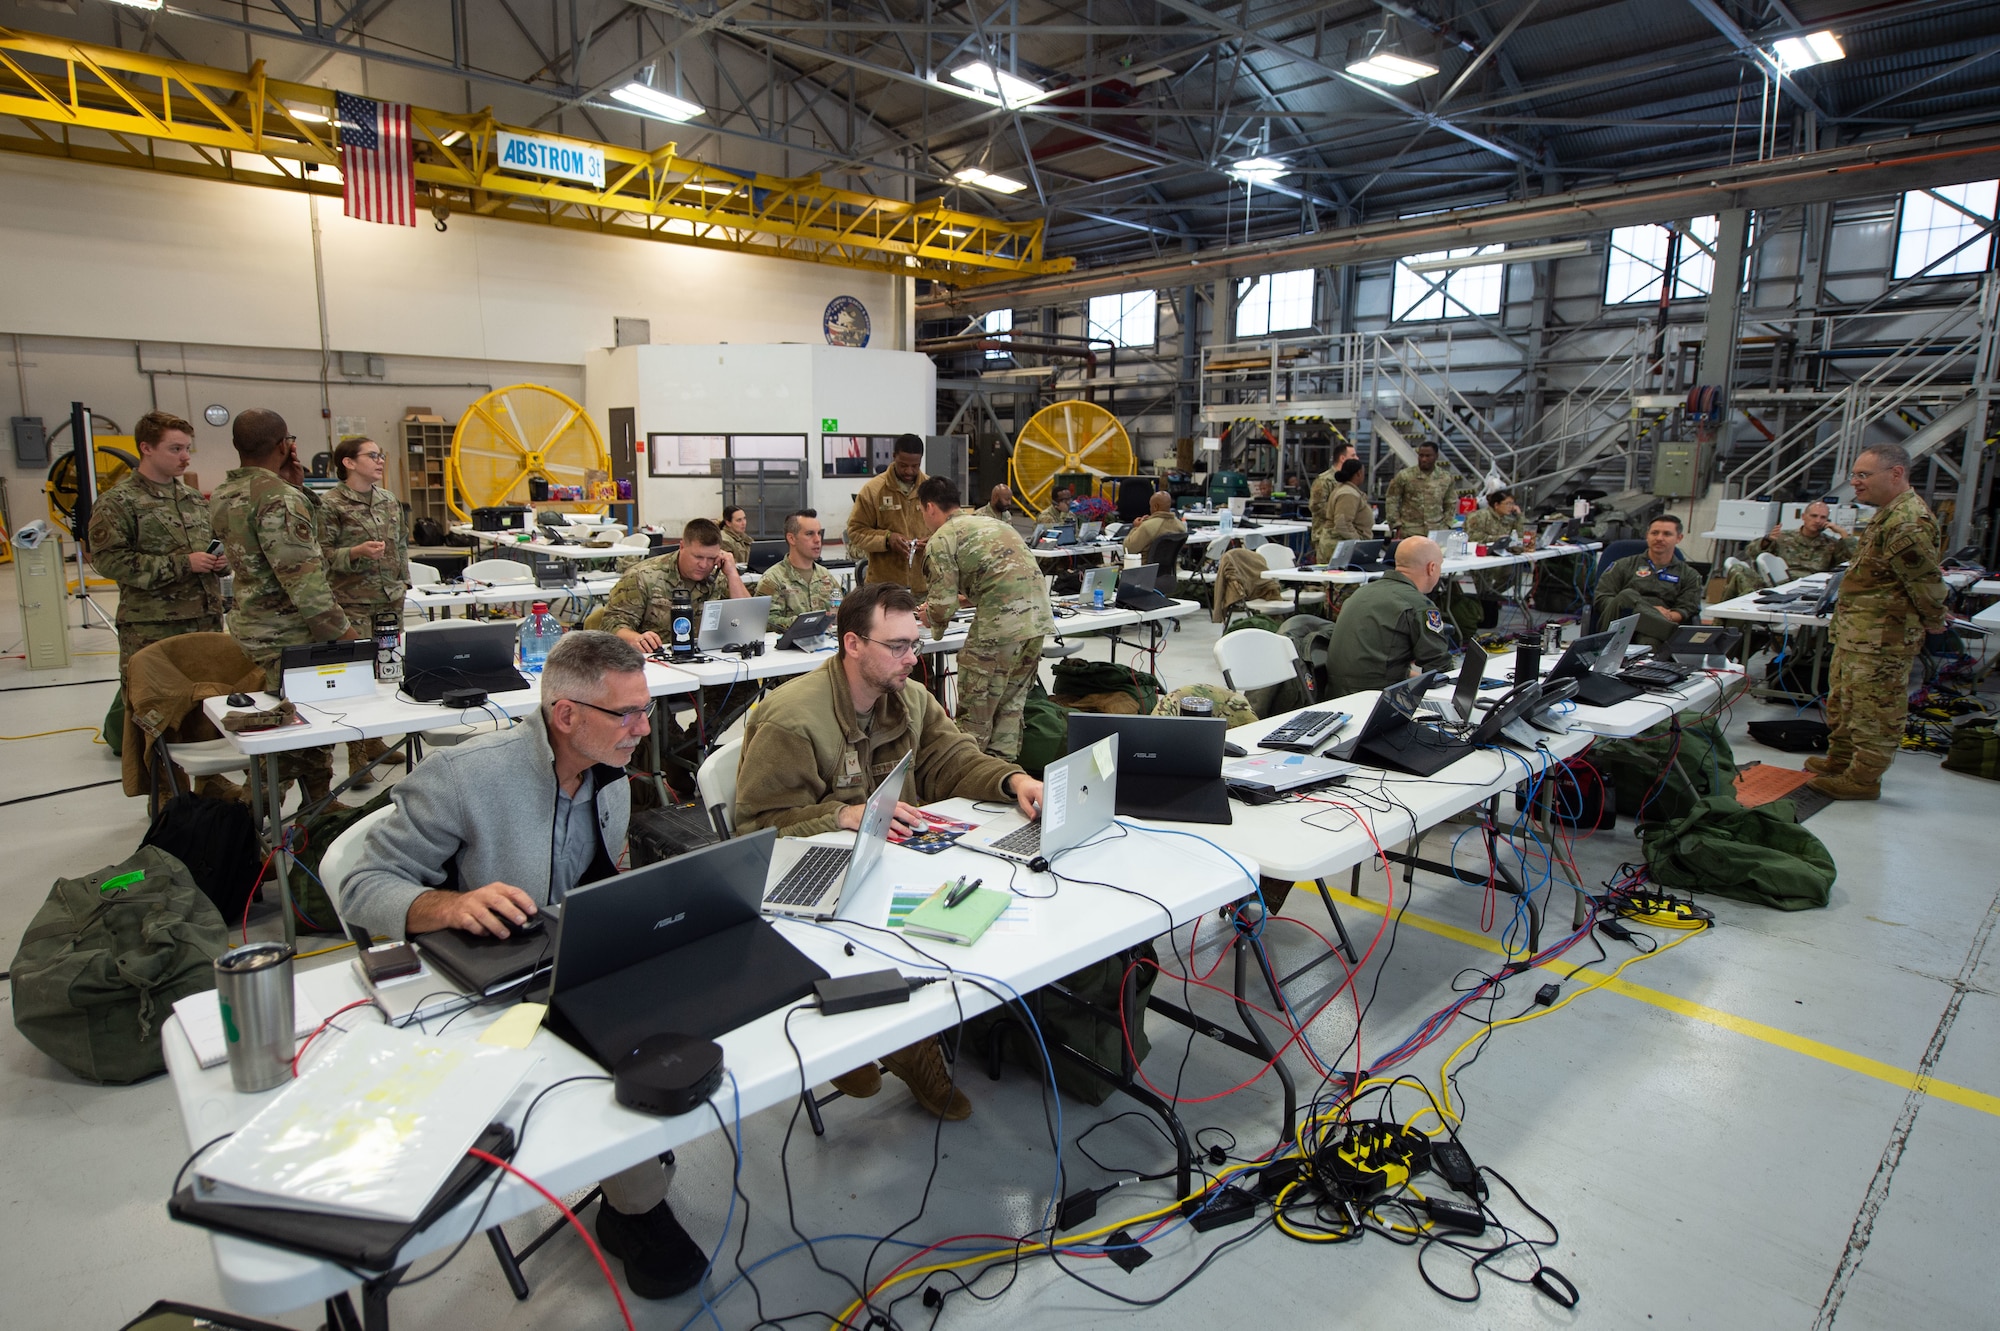 U.S. Air Force Airmen assigned to the 23rd Wing manage activities for exercise Mosaic Tiger 24-1 at the Wing Operations Center at Moody Air Force Base, Georgia, Nov. 15, 2023. The WOC acted as the central hub for command and control for participants of the readiness exercise. (U.S. Air Force photo by Airman Cade Ellis)